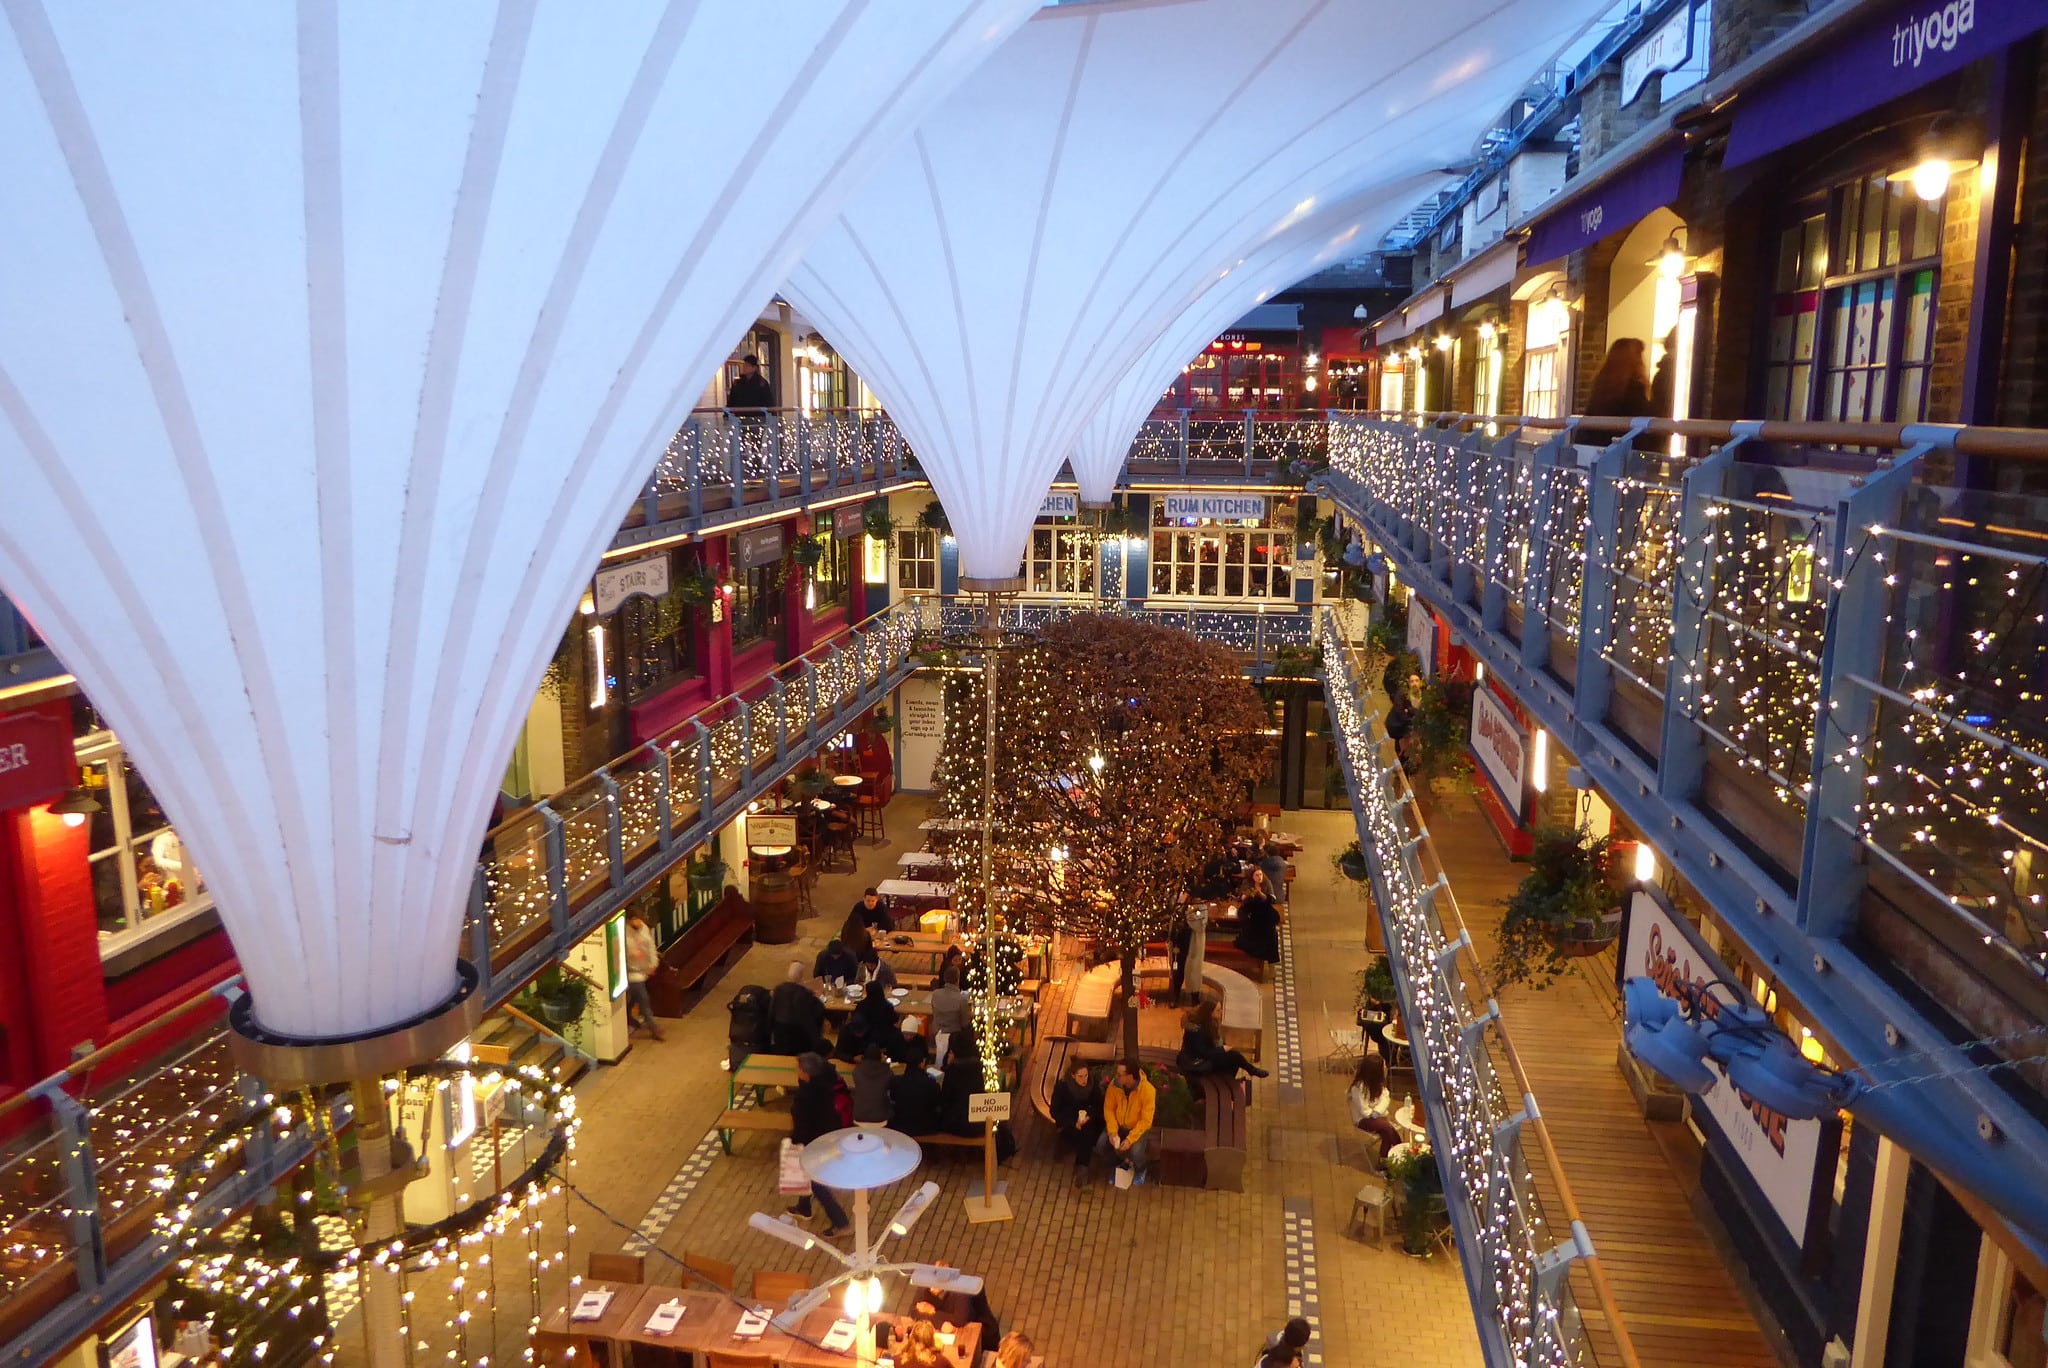 Kingly Court 